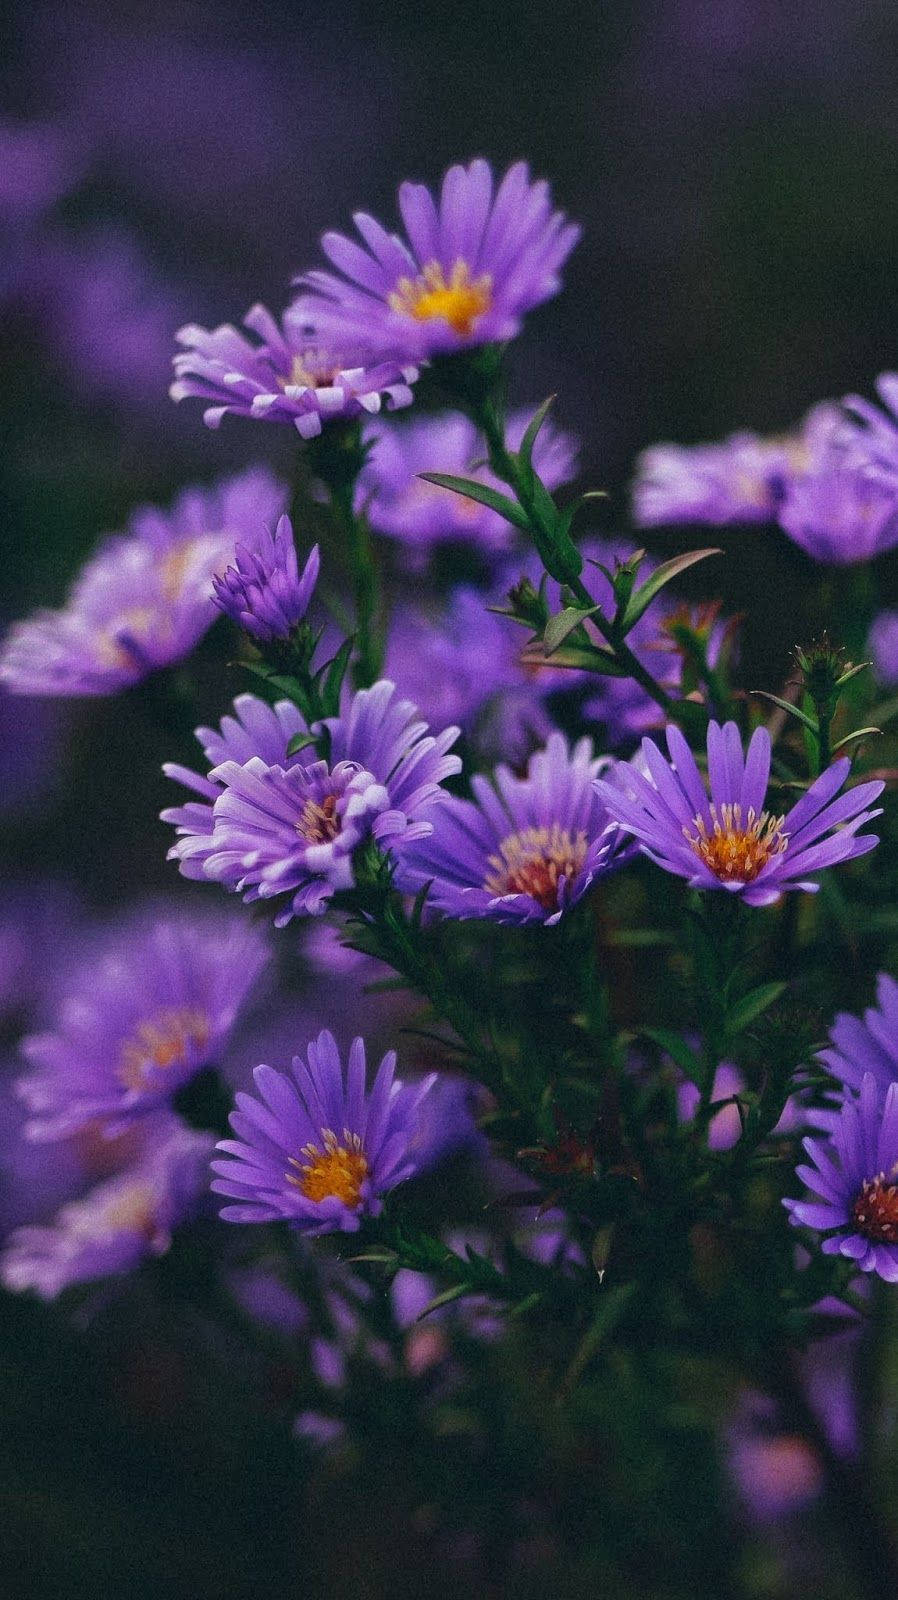 Aesthetic Purple Flower in Close-up. Wallpaper